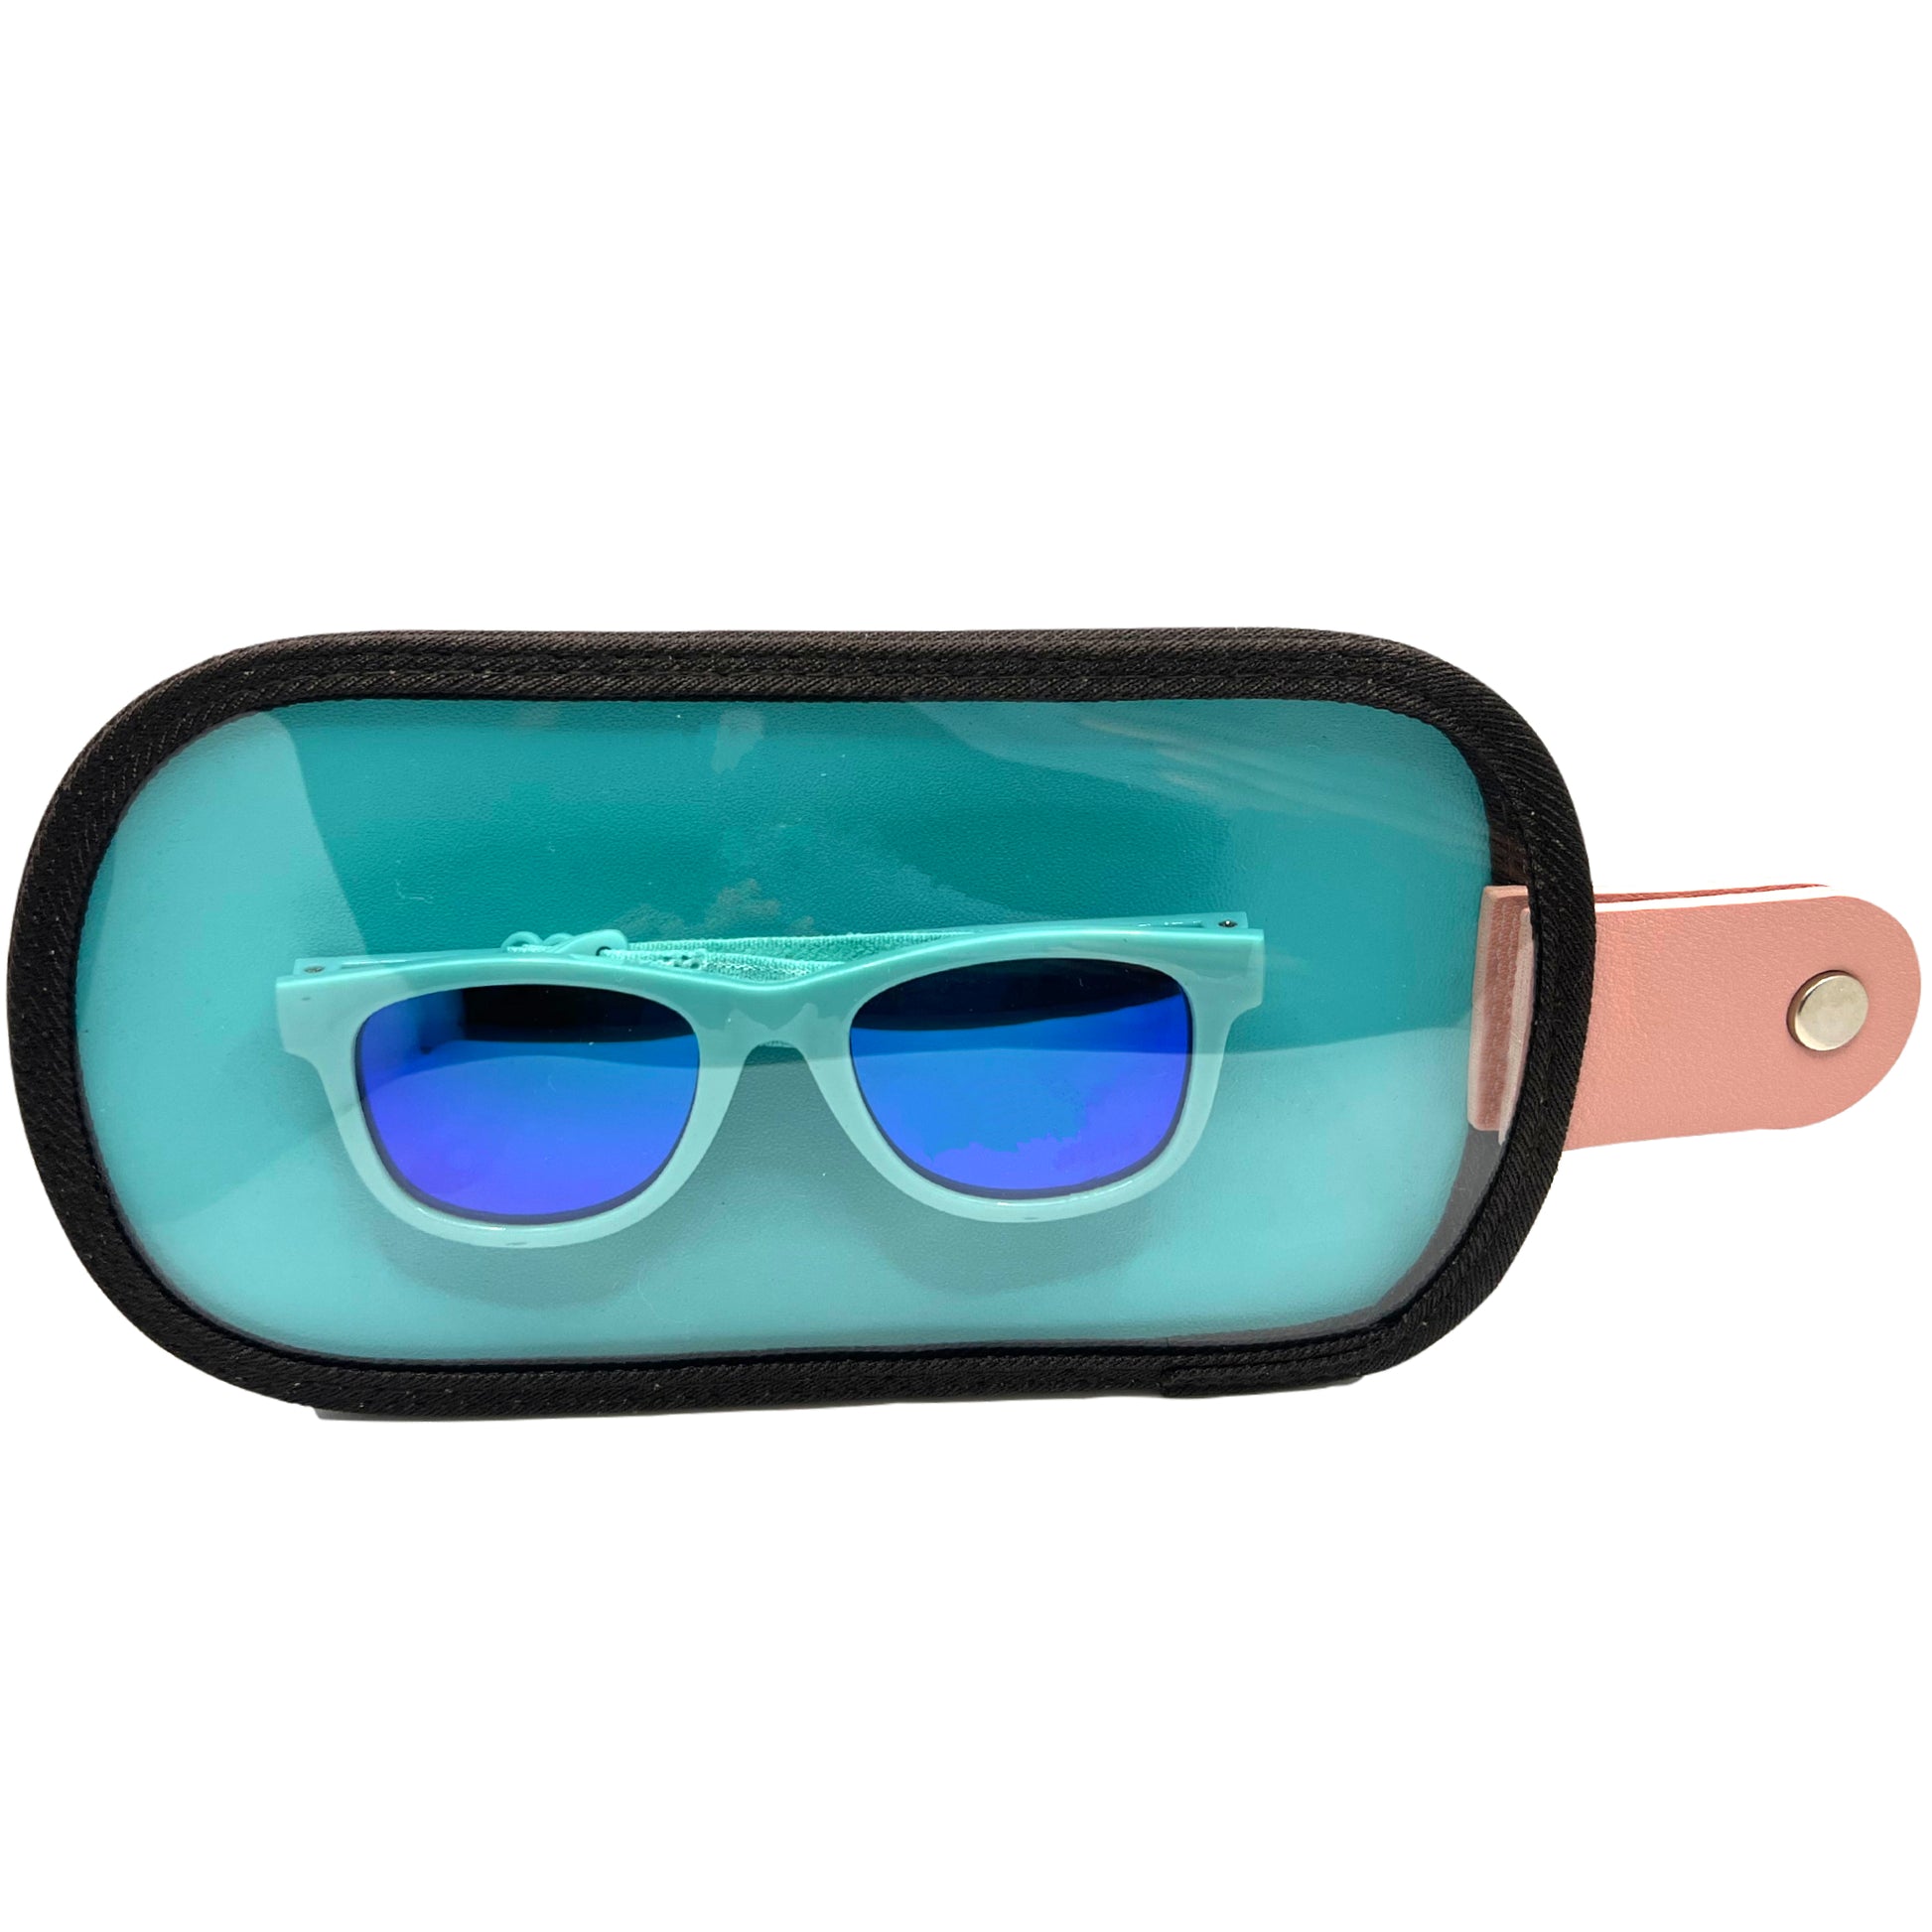 Bprotectedstore Mina Turquoise Infant Polarized Shades - Cute and Protective Eyewear for Little Ones-Packaging